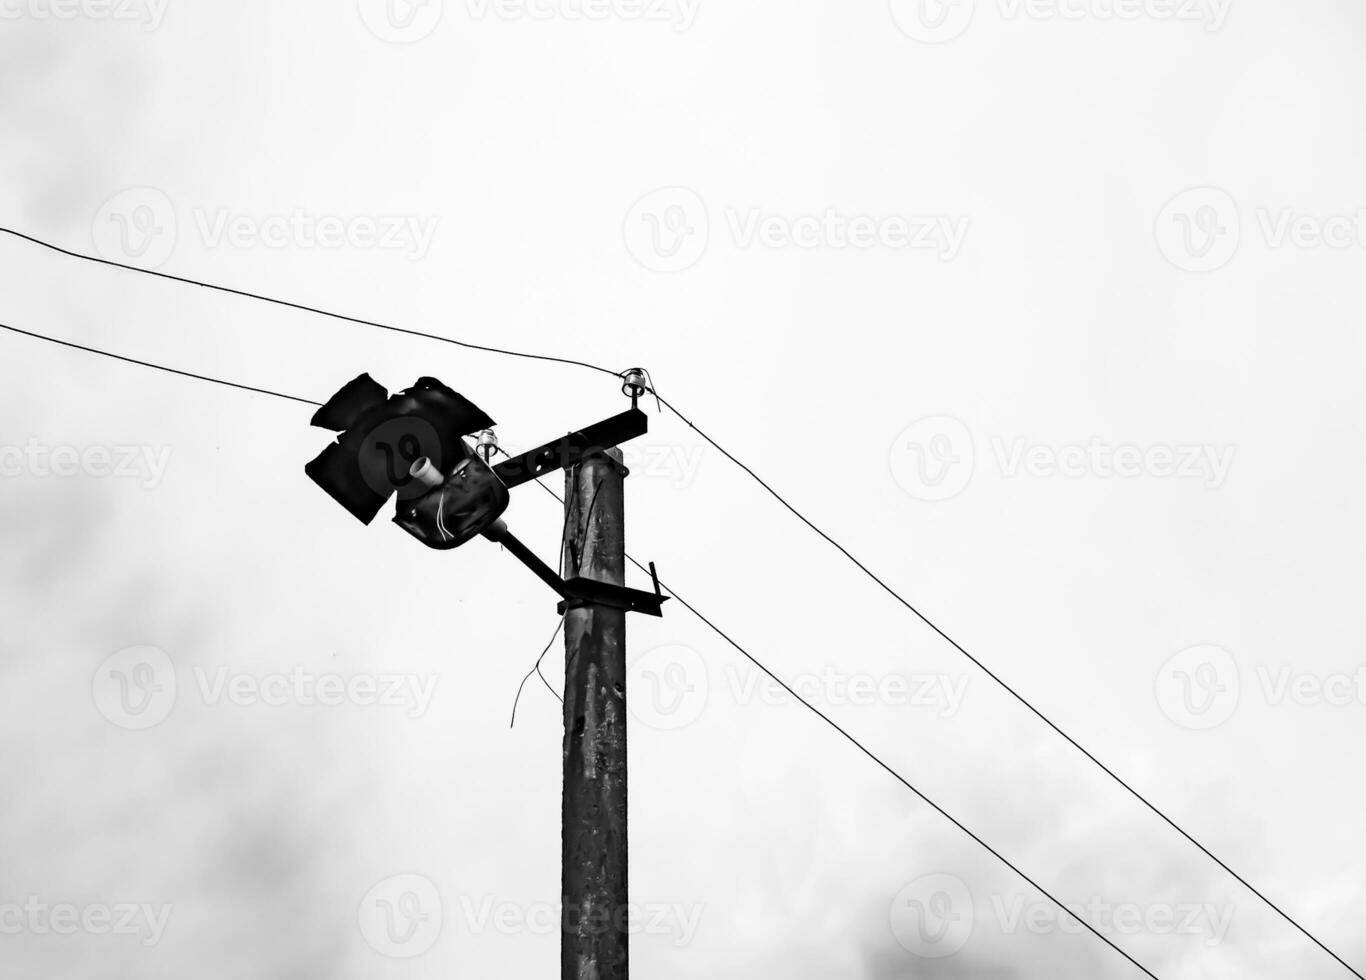 Power electric pole with line wire on light background close up photo